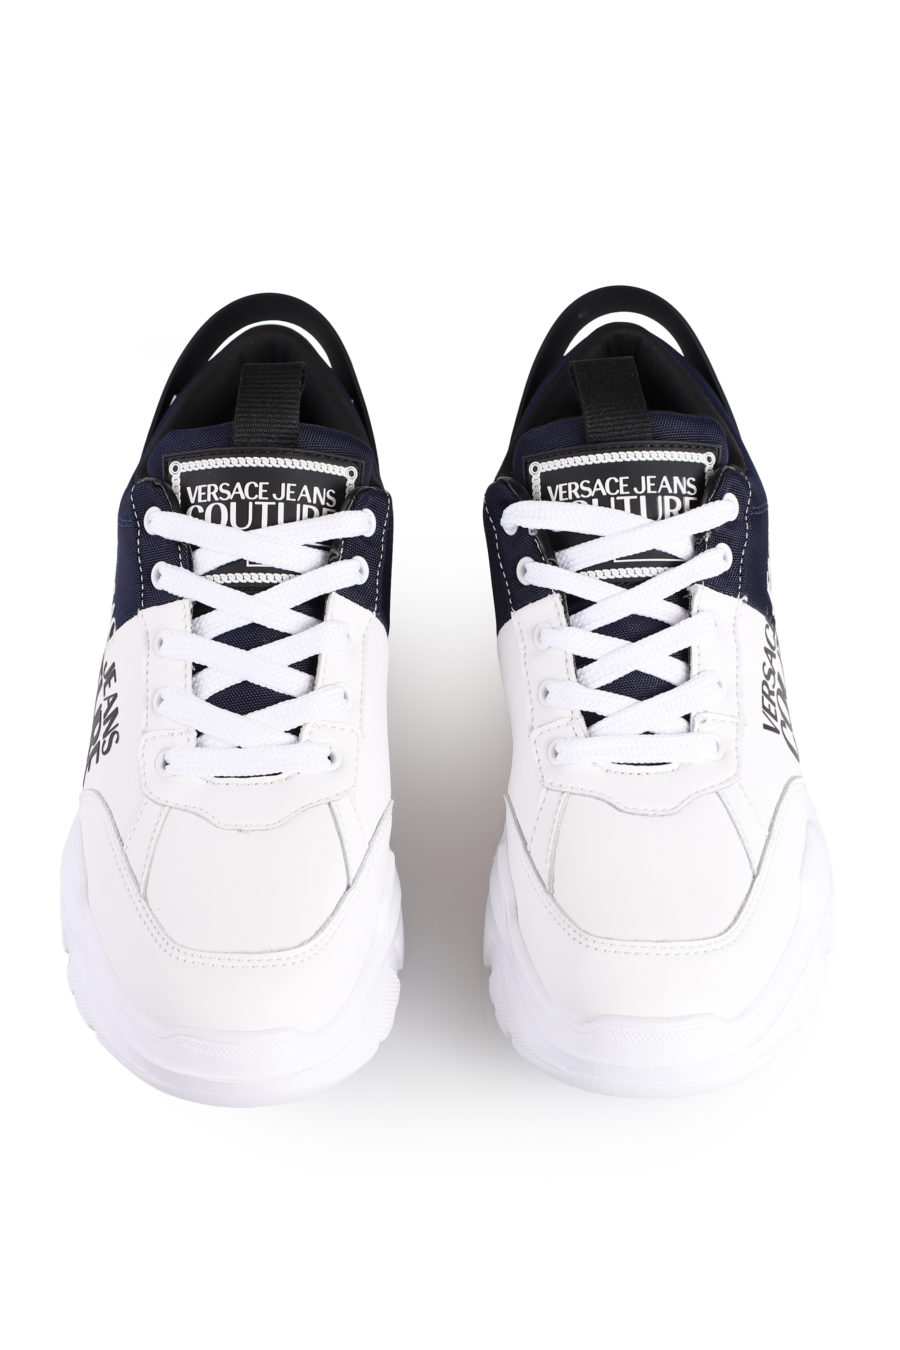 Shoes "Speedtrack" in white and blue - IMG 1030